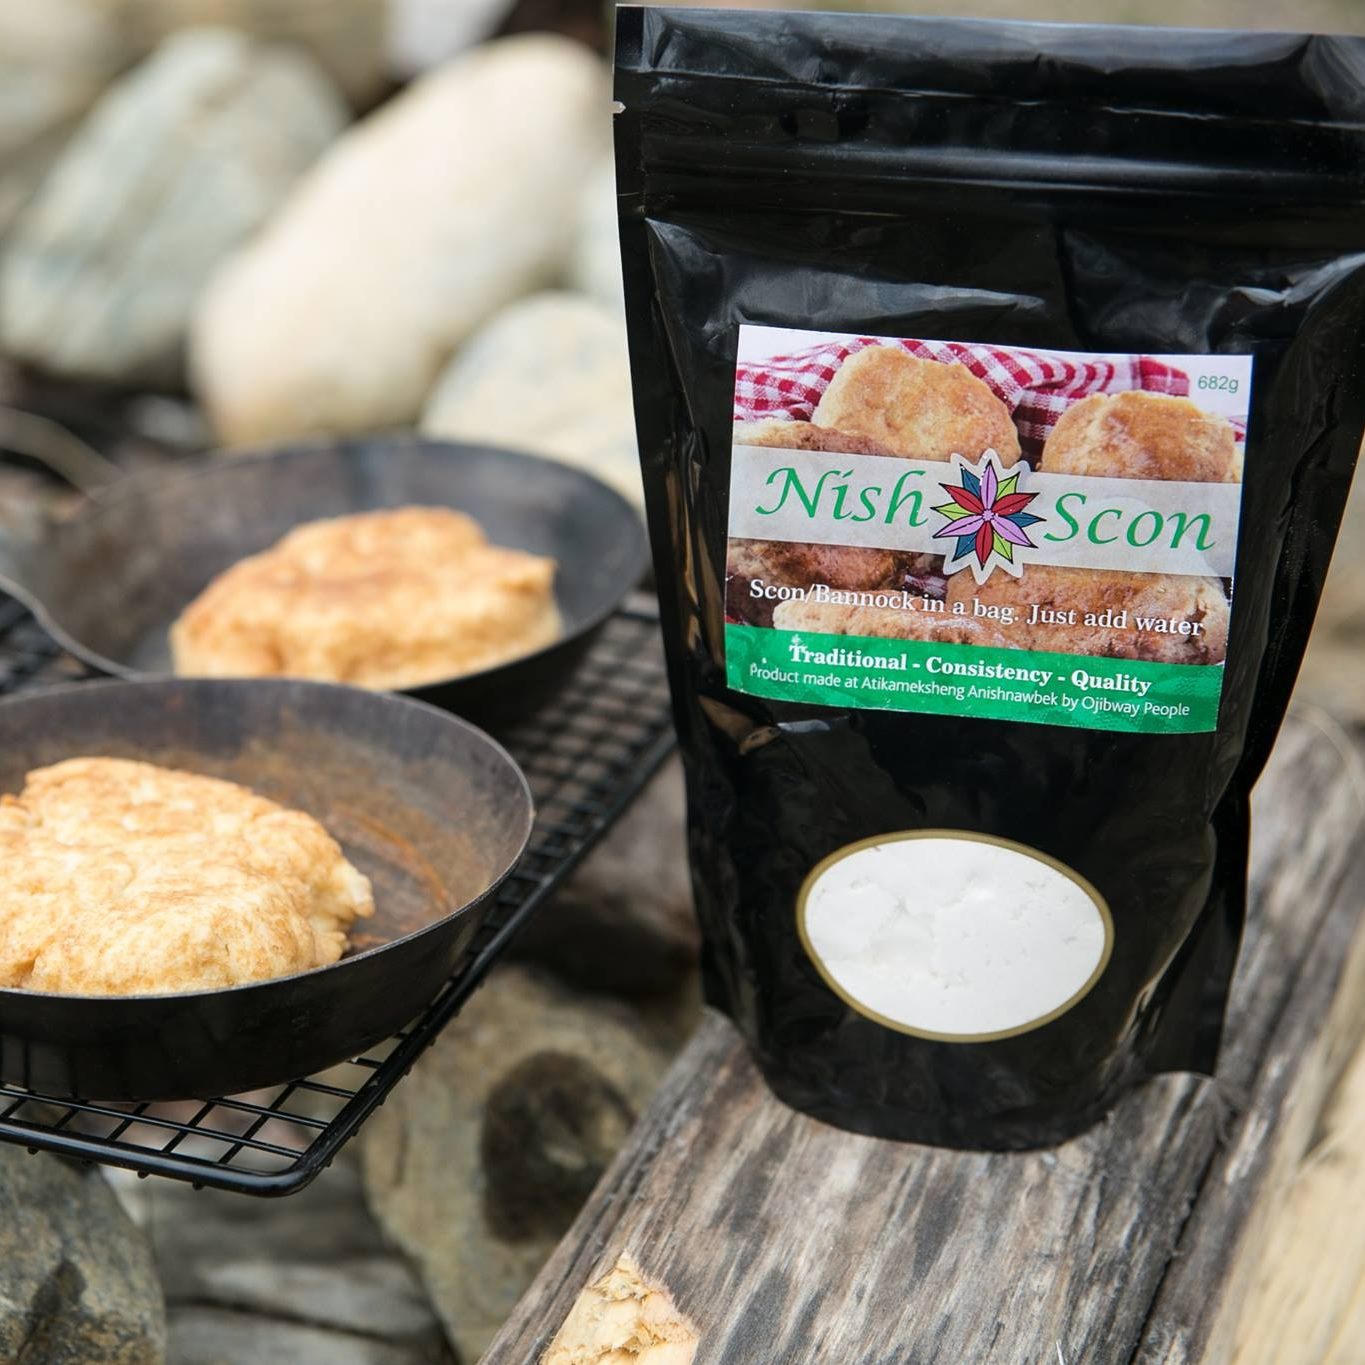 Two scons cooking over a fire in a cast iron pan alongside a black package of NISH brand scon mix. 